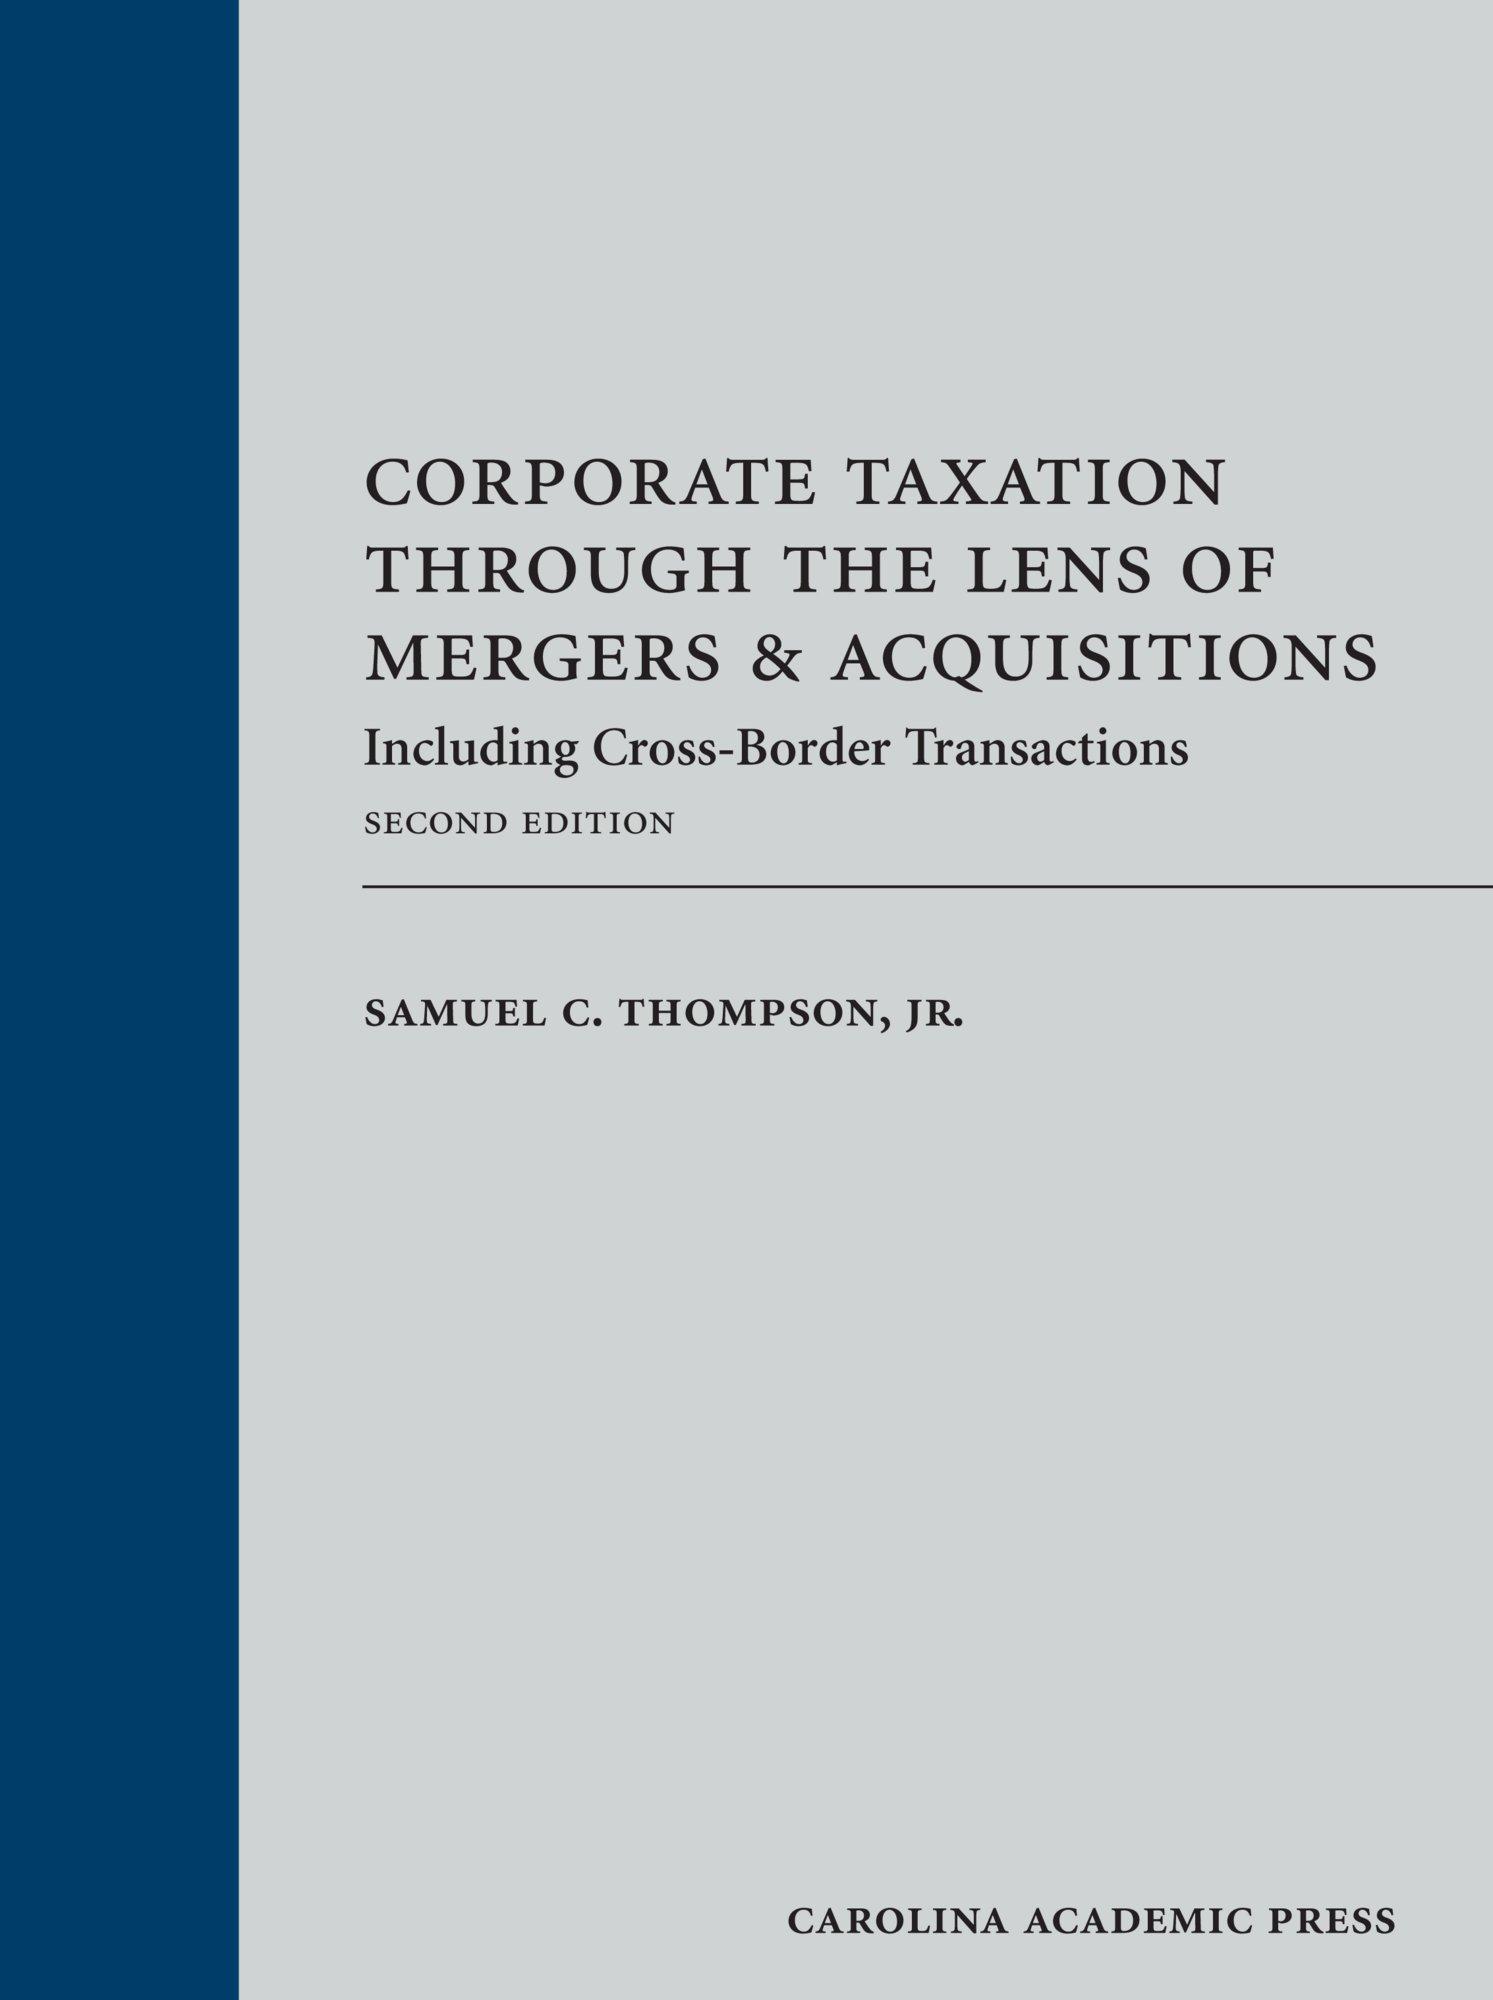 corporate taxation through the lens of mergers and acquisitions 2nd edition samuel thompson 1611631750,